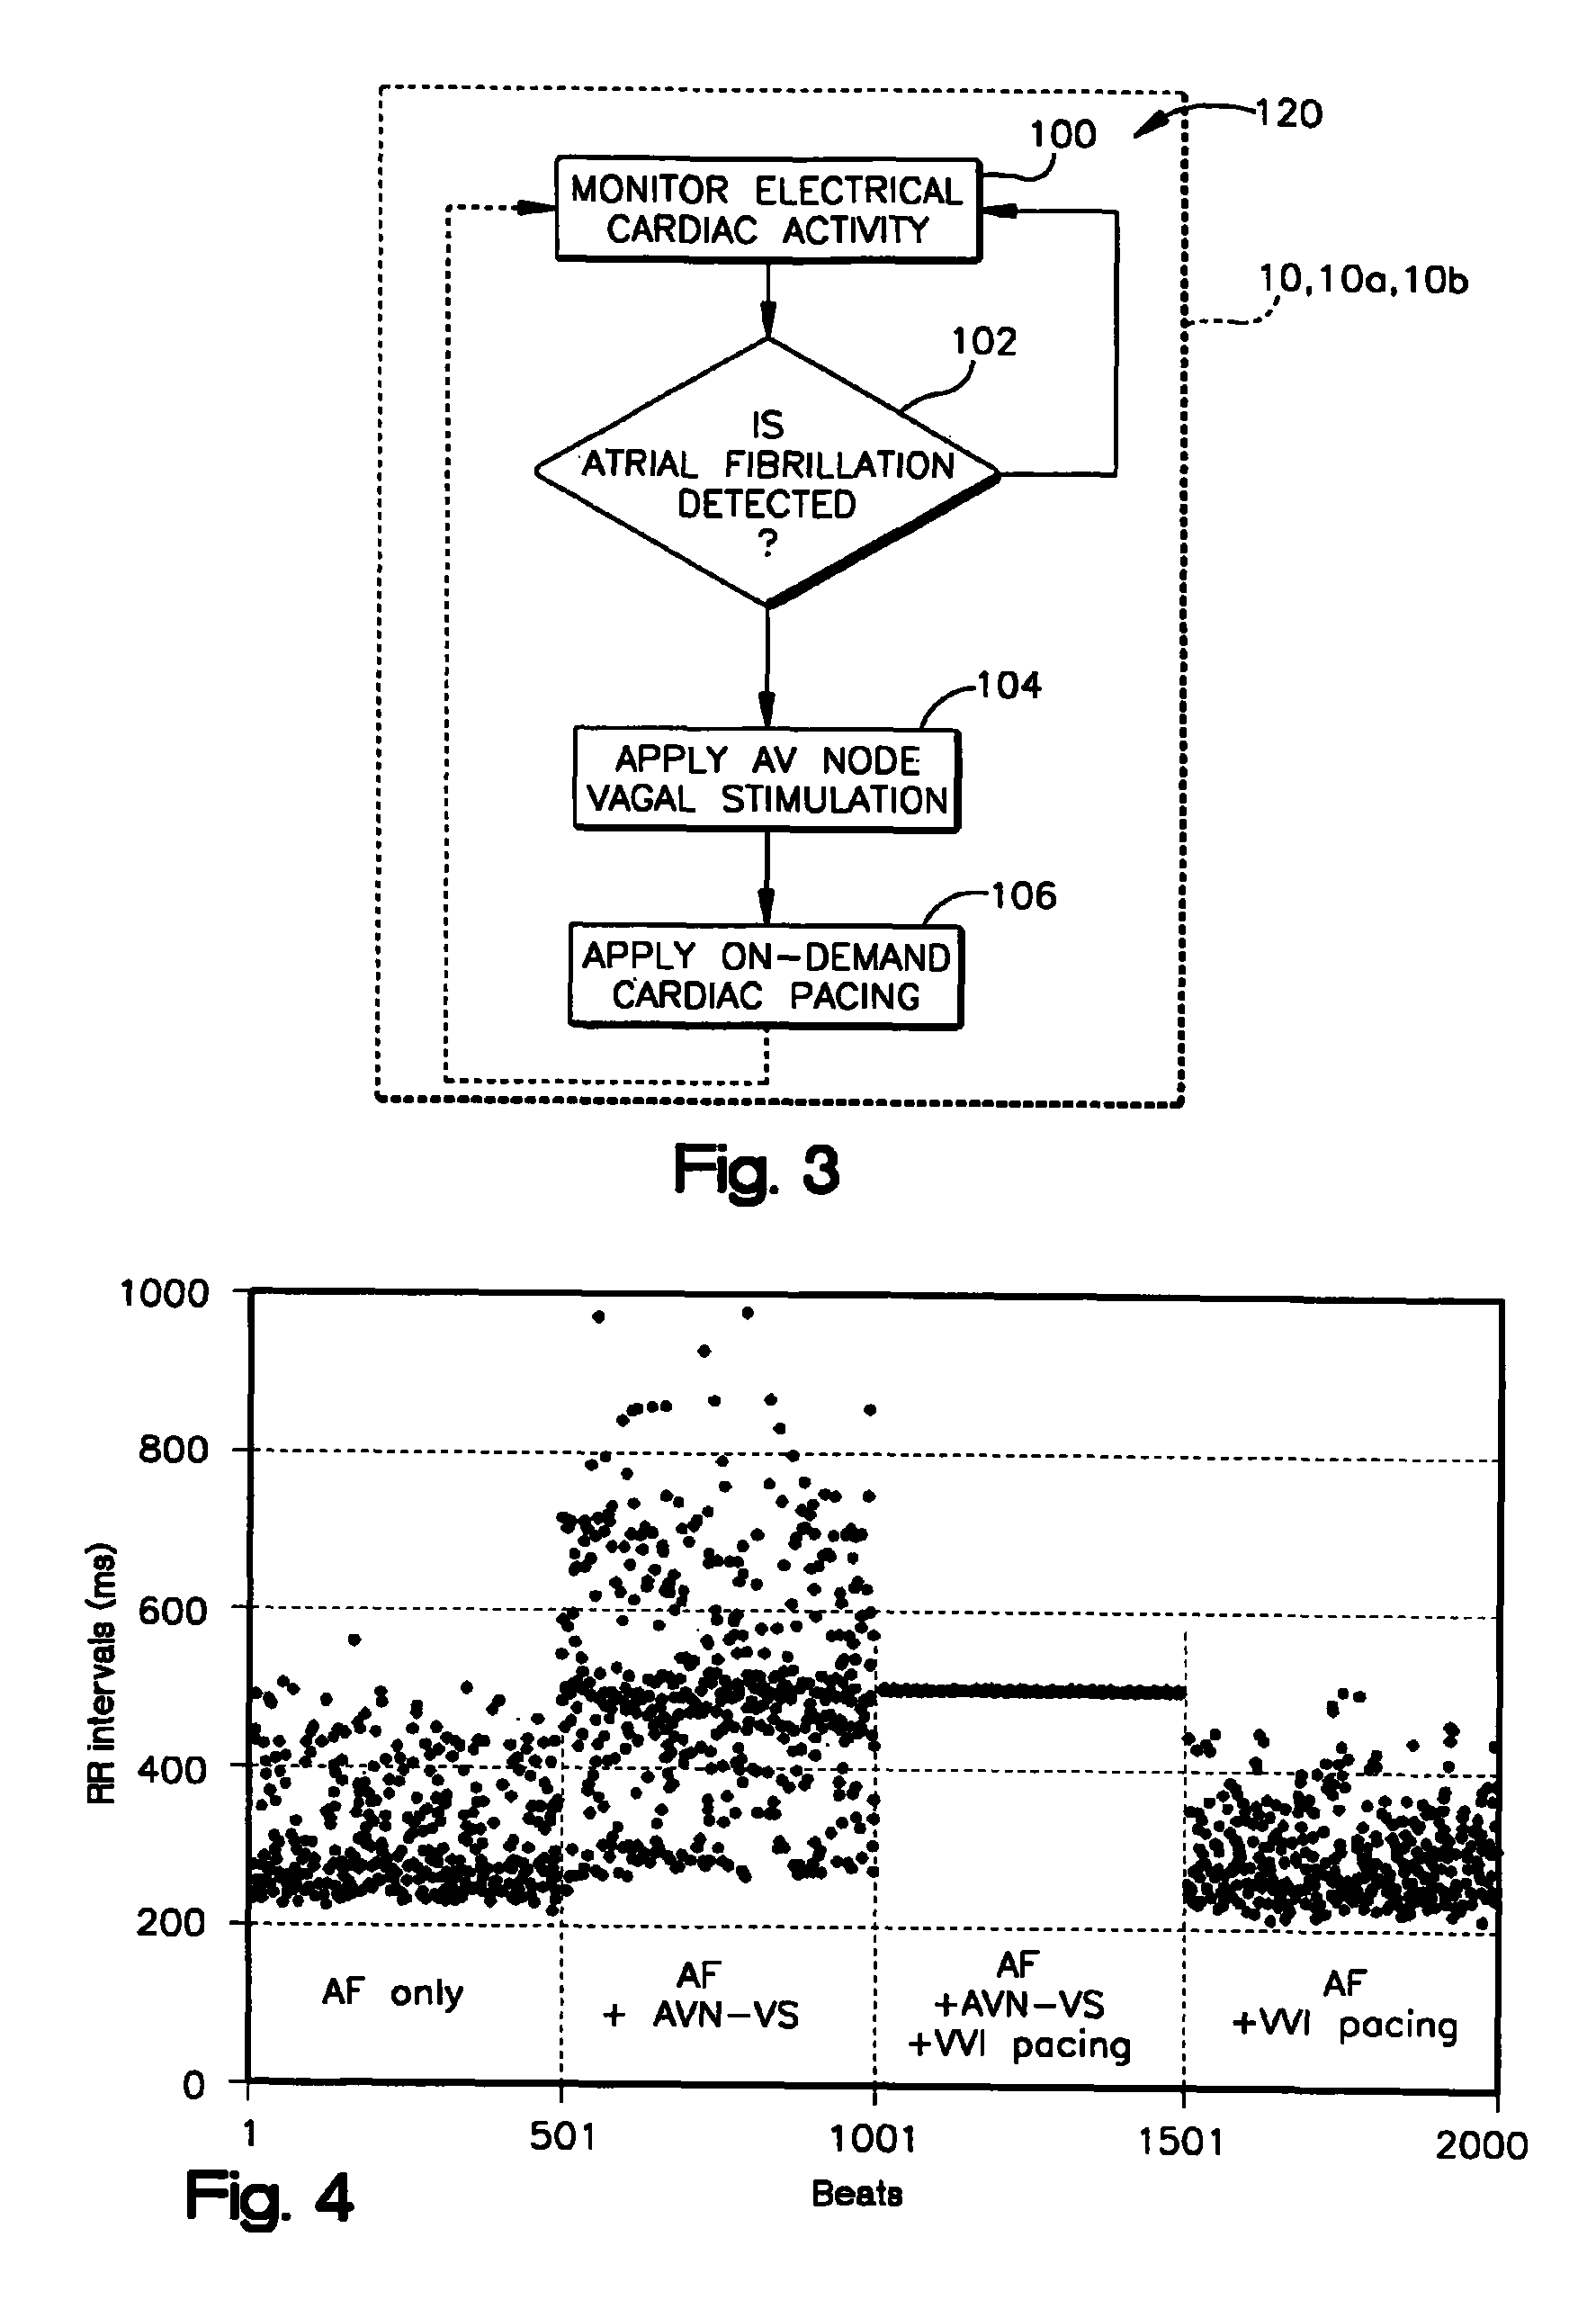 System and method for achieving regular slow ventricular rhythm in response to atrial fibrillation